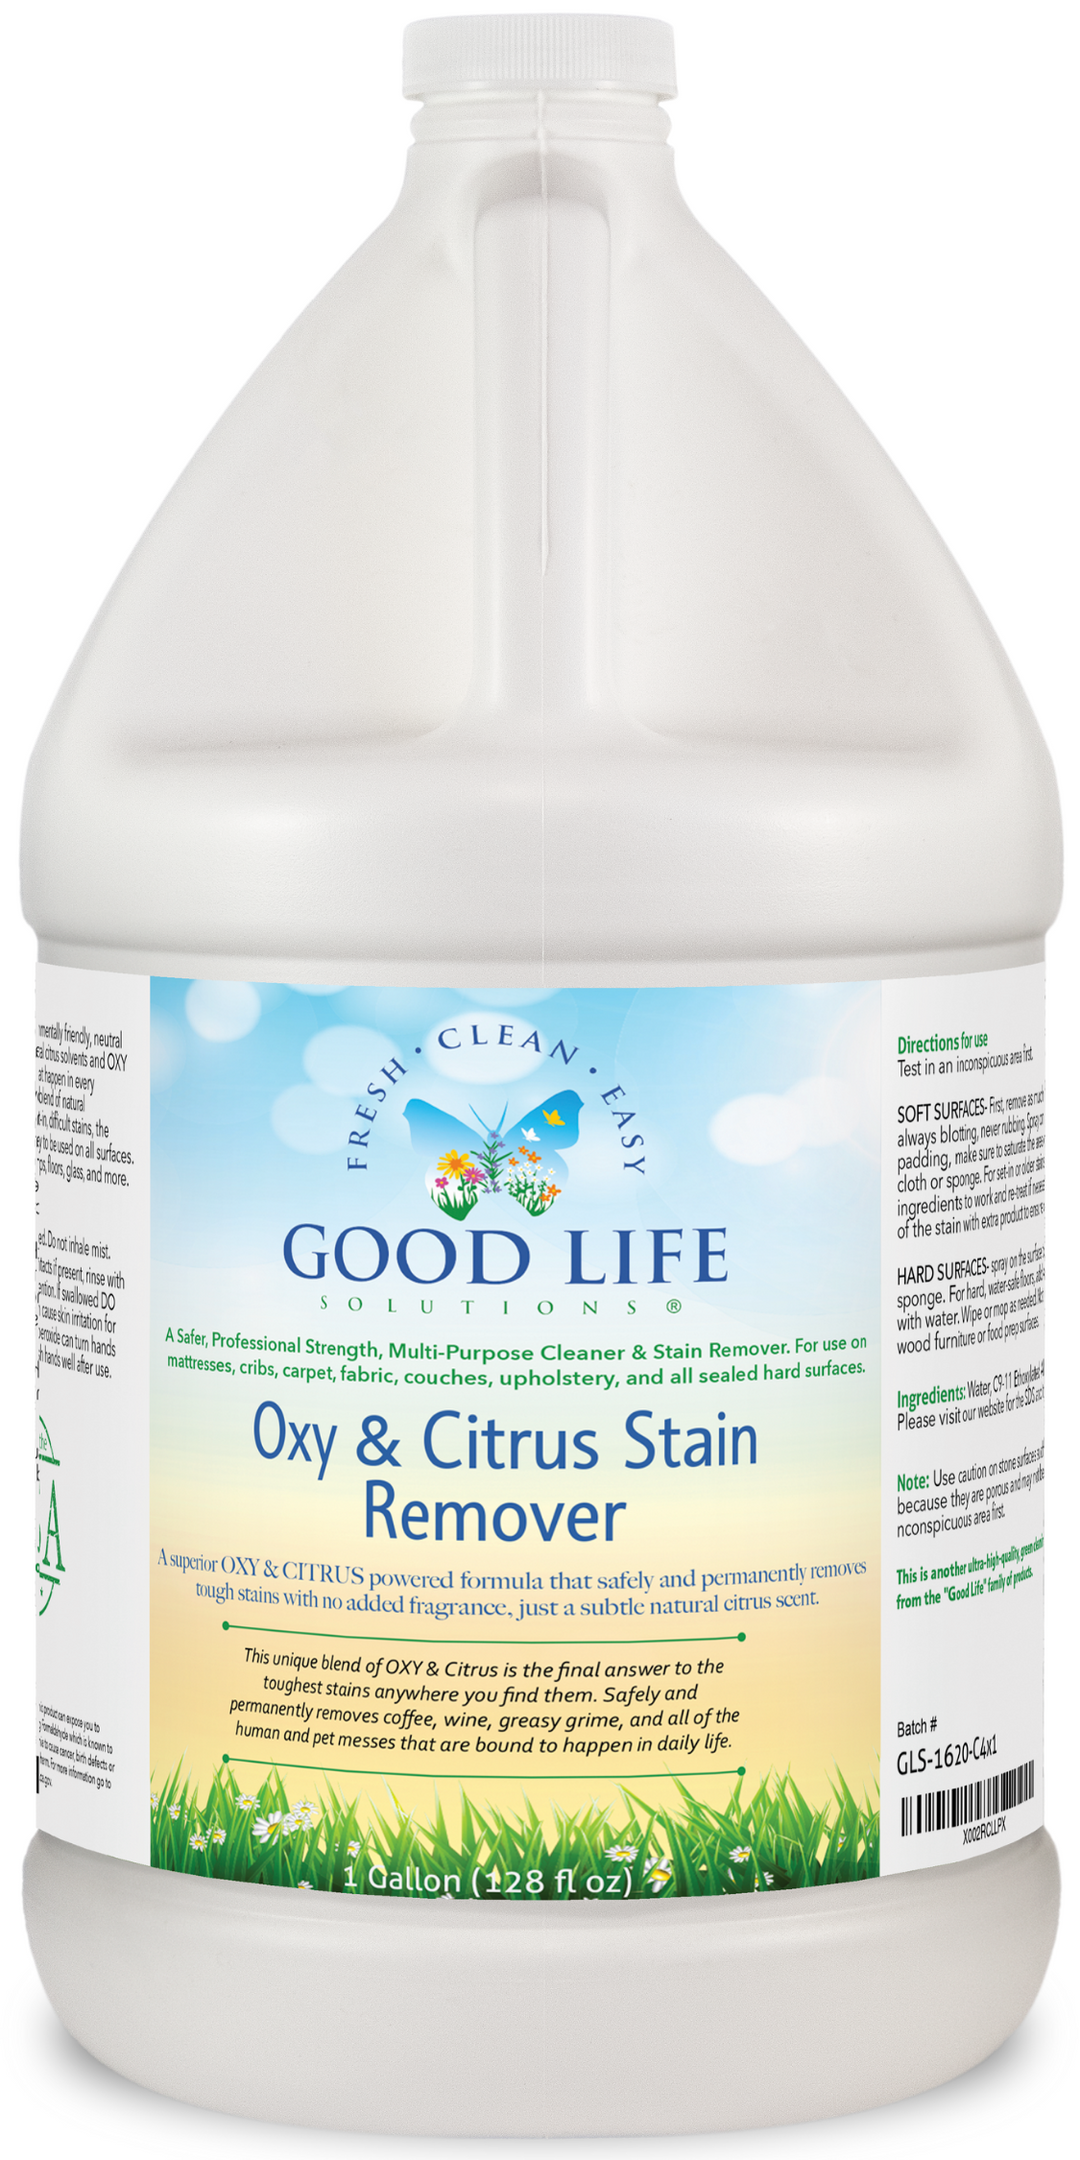 Citrus based cleaner degreaser cleans multiple surfaces